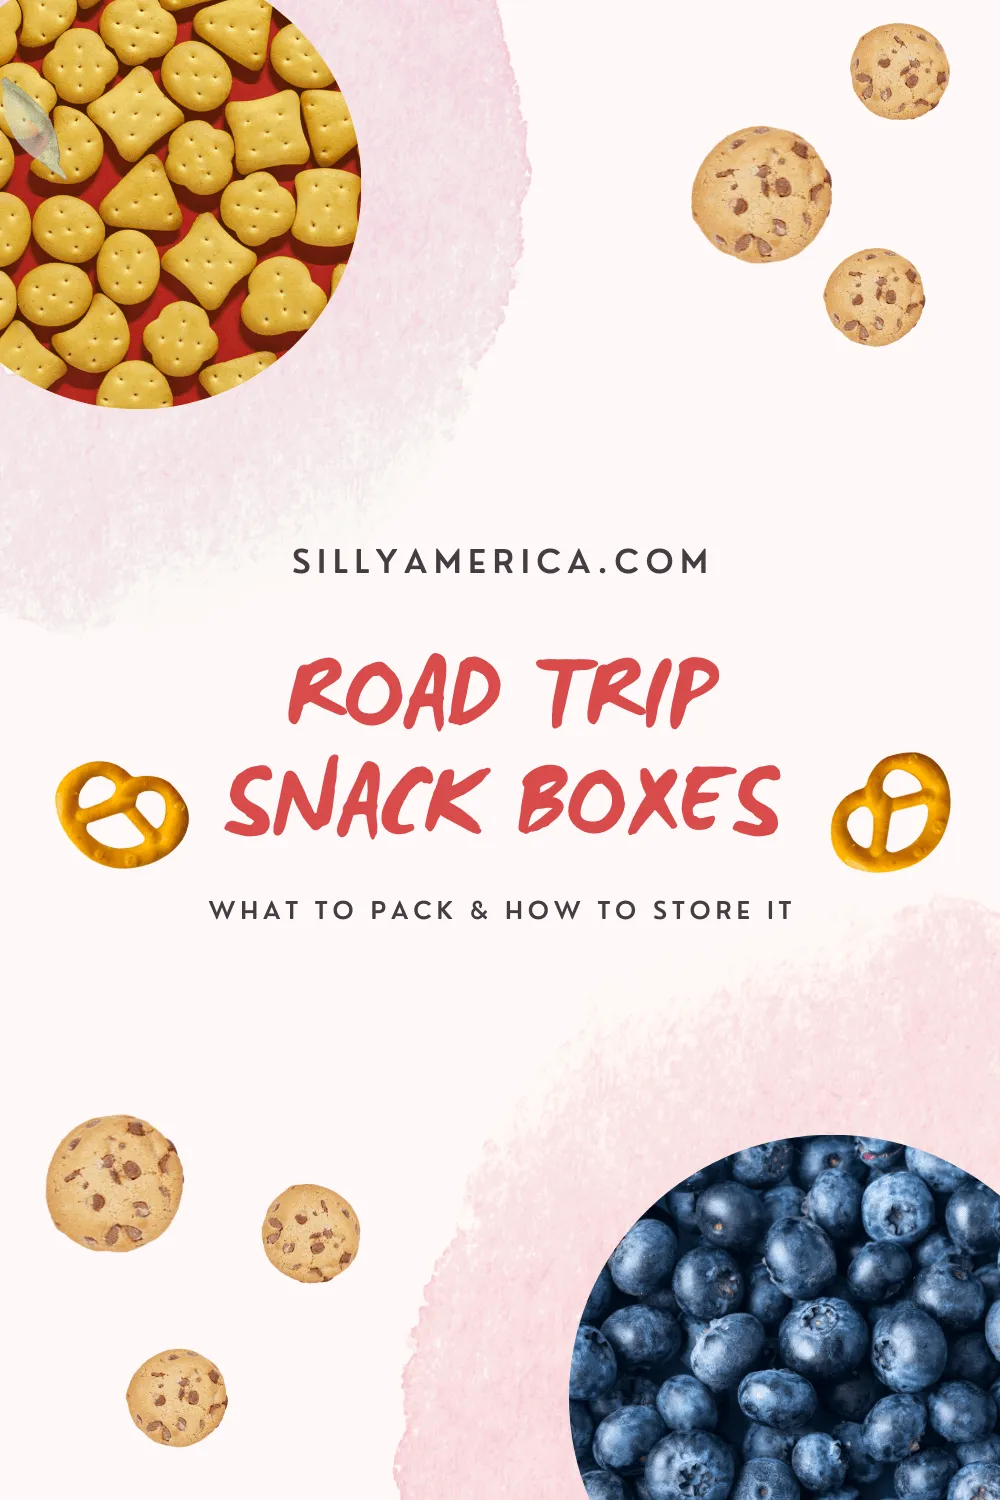 Road trip snack boxes are a fun way to get nourishment throughout the day on long car rides. Pack road trip snacks on your adventure for a fun and healthy treat for kids, teens, and adults. How do you make one? And what snacks should you use? Read on!  #RoadTripSnacks #RoadTripSnacksForAdults #Healthy#RoadTripSnacks #RoadTripSnacksForKids #RoadTripSnacksTeens #RoadTripSnacks #EasyRoadTripSnacks #RoadTripSnacksIdeas #RoadTripSnacksList #FamilyRoadTripSnacks